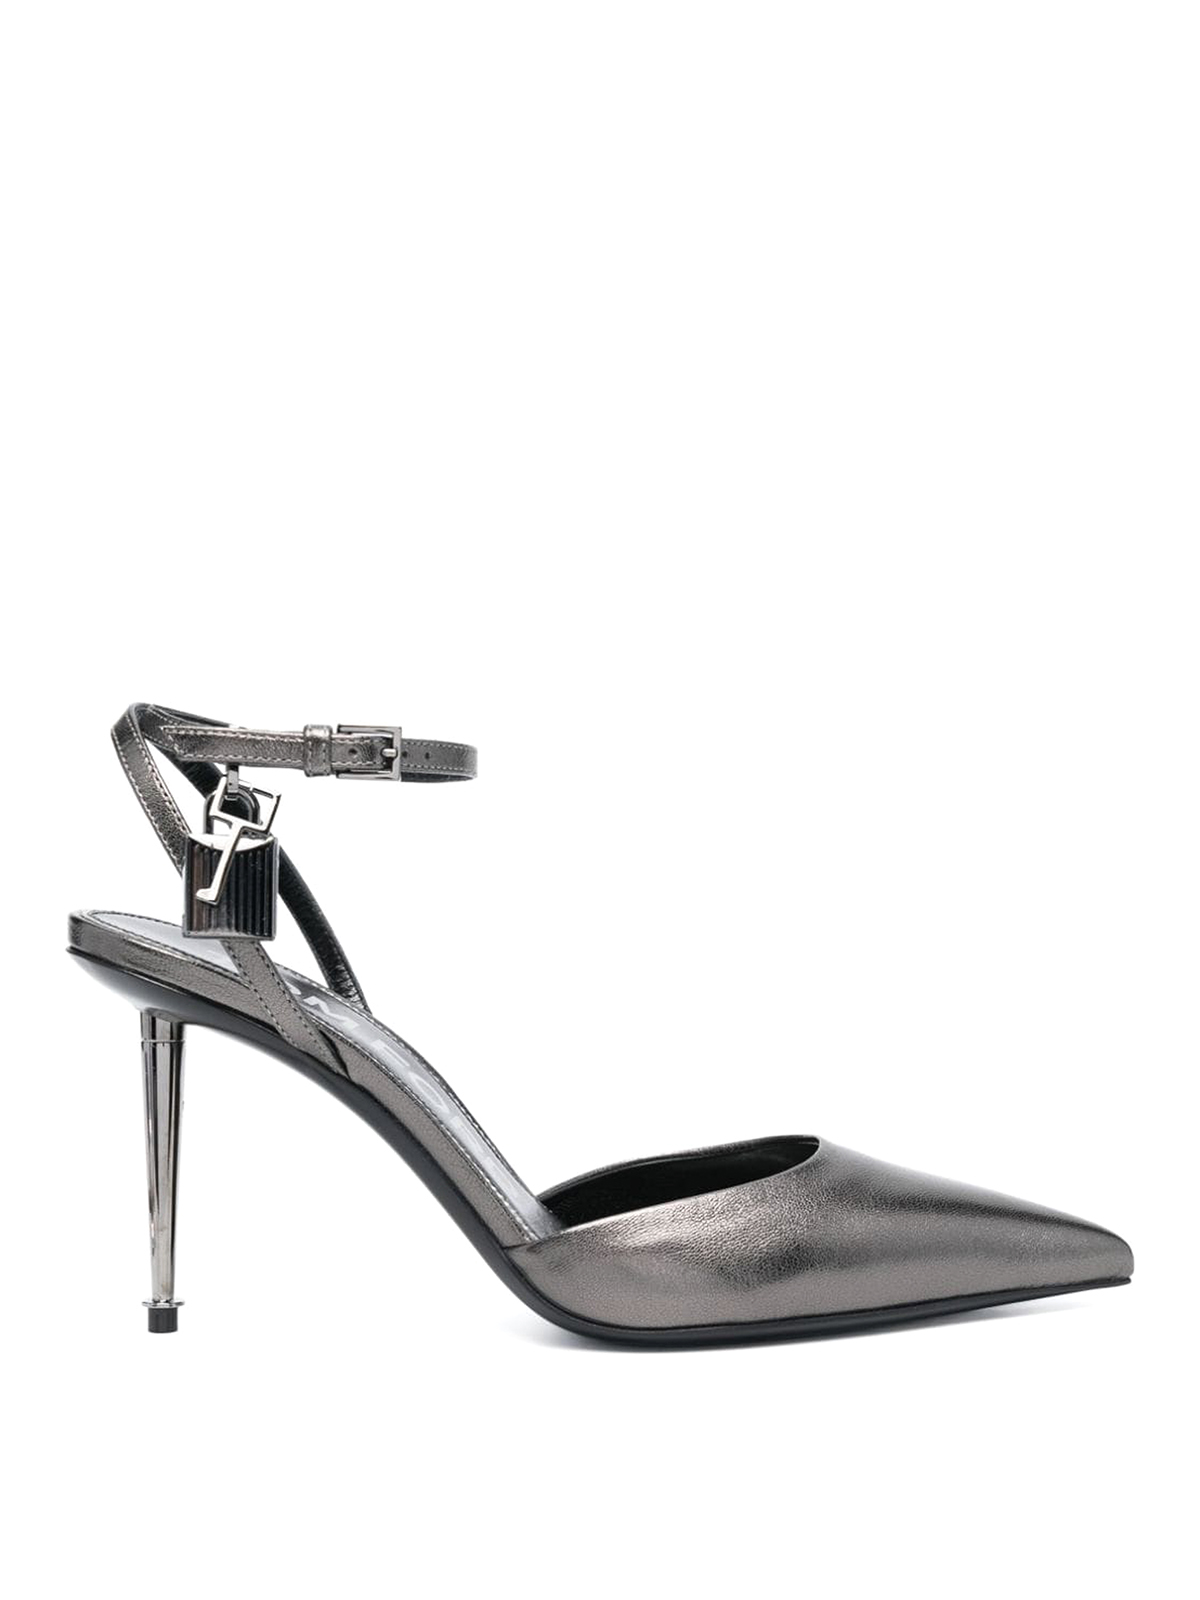 Tom Ford Slingback Pumps In Grey